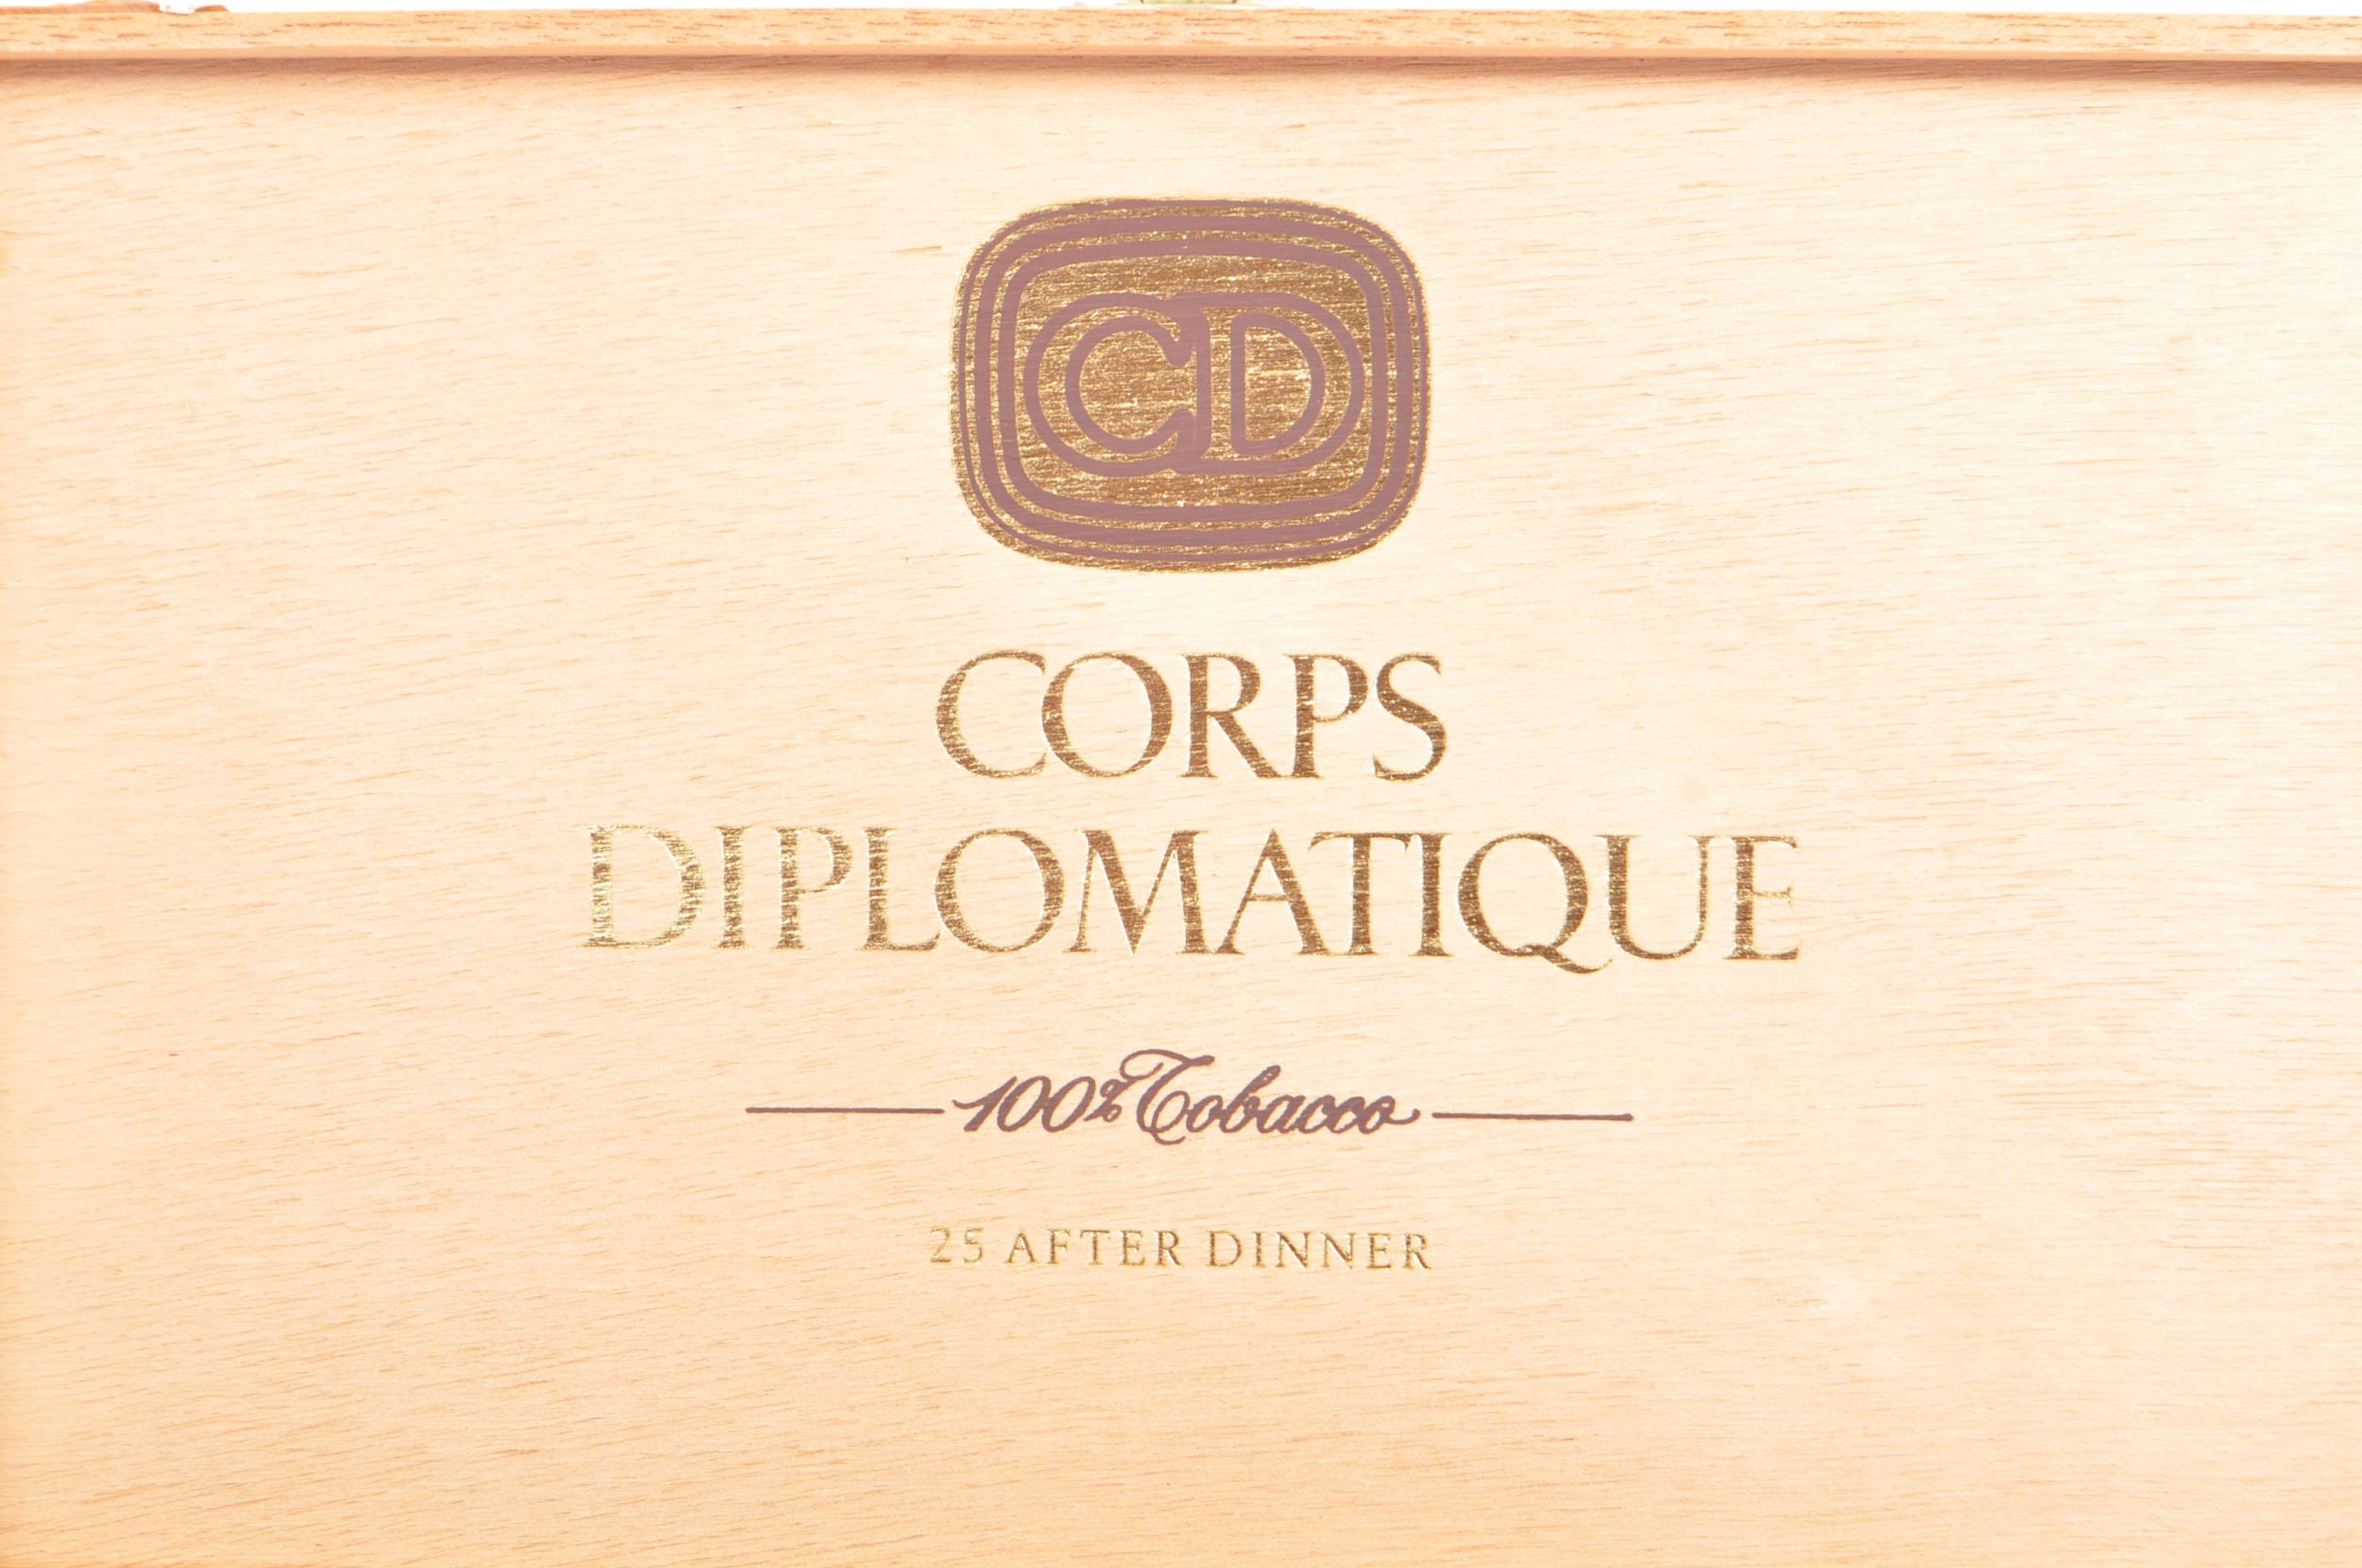 BOXED COLLECTION OF 'CORPS DIPLOMATIQUE' AFTER DINNER CIGARS - Image 4 of 6